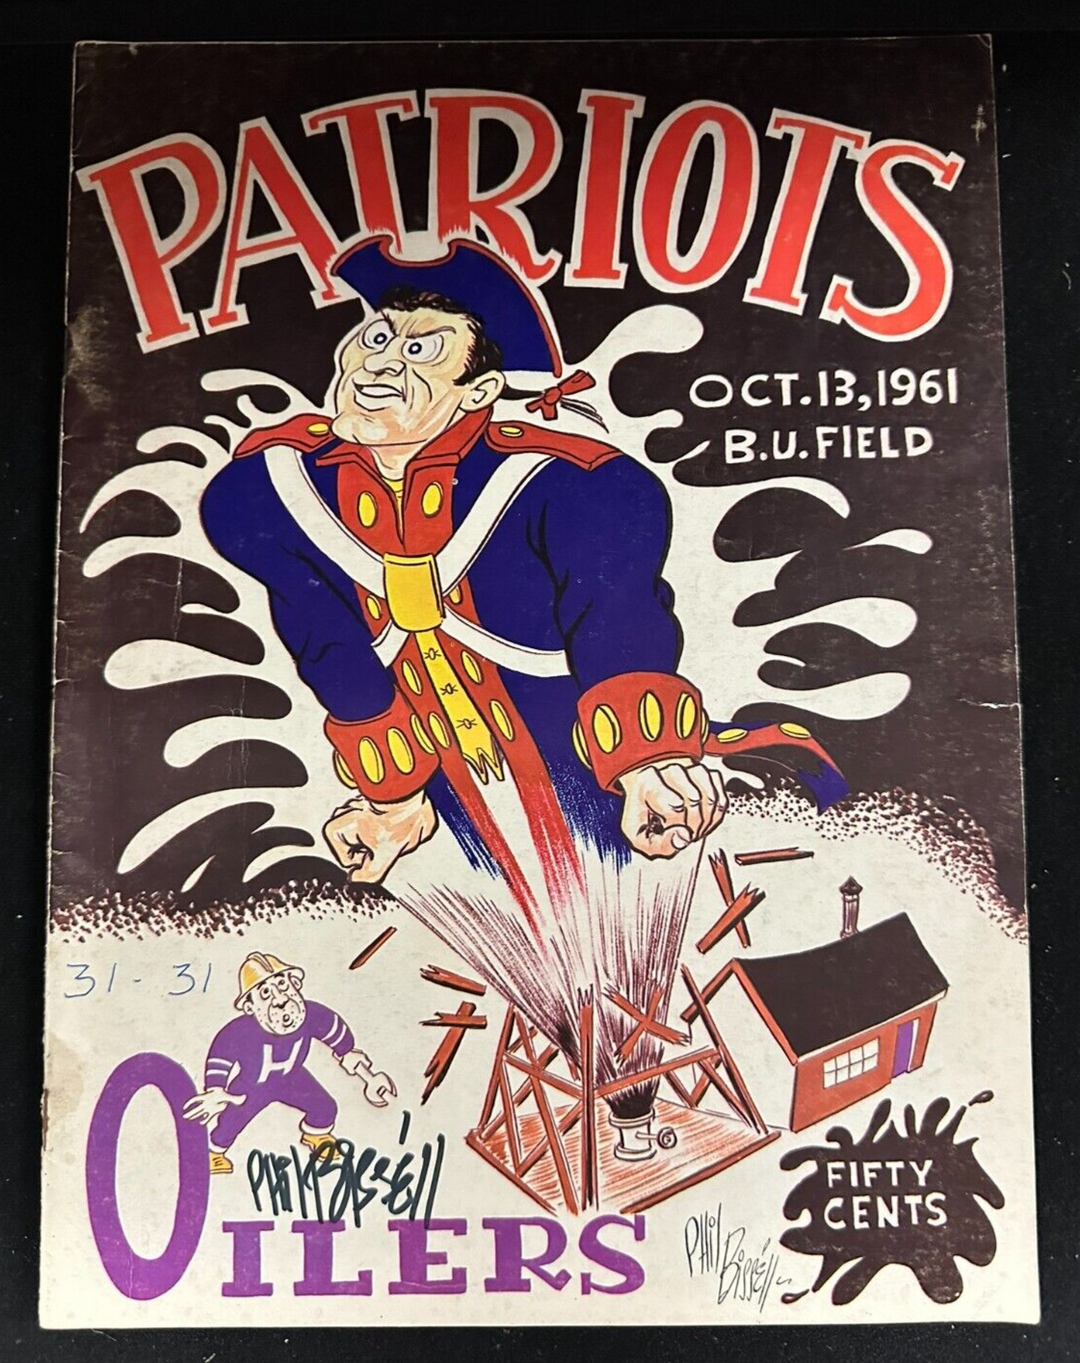 Phil Bissell Autographed Oct 13, 1961 Boston Patriots & Oilers Program AFL